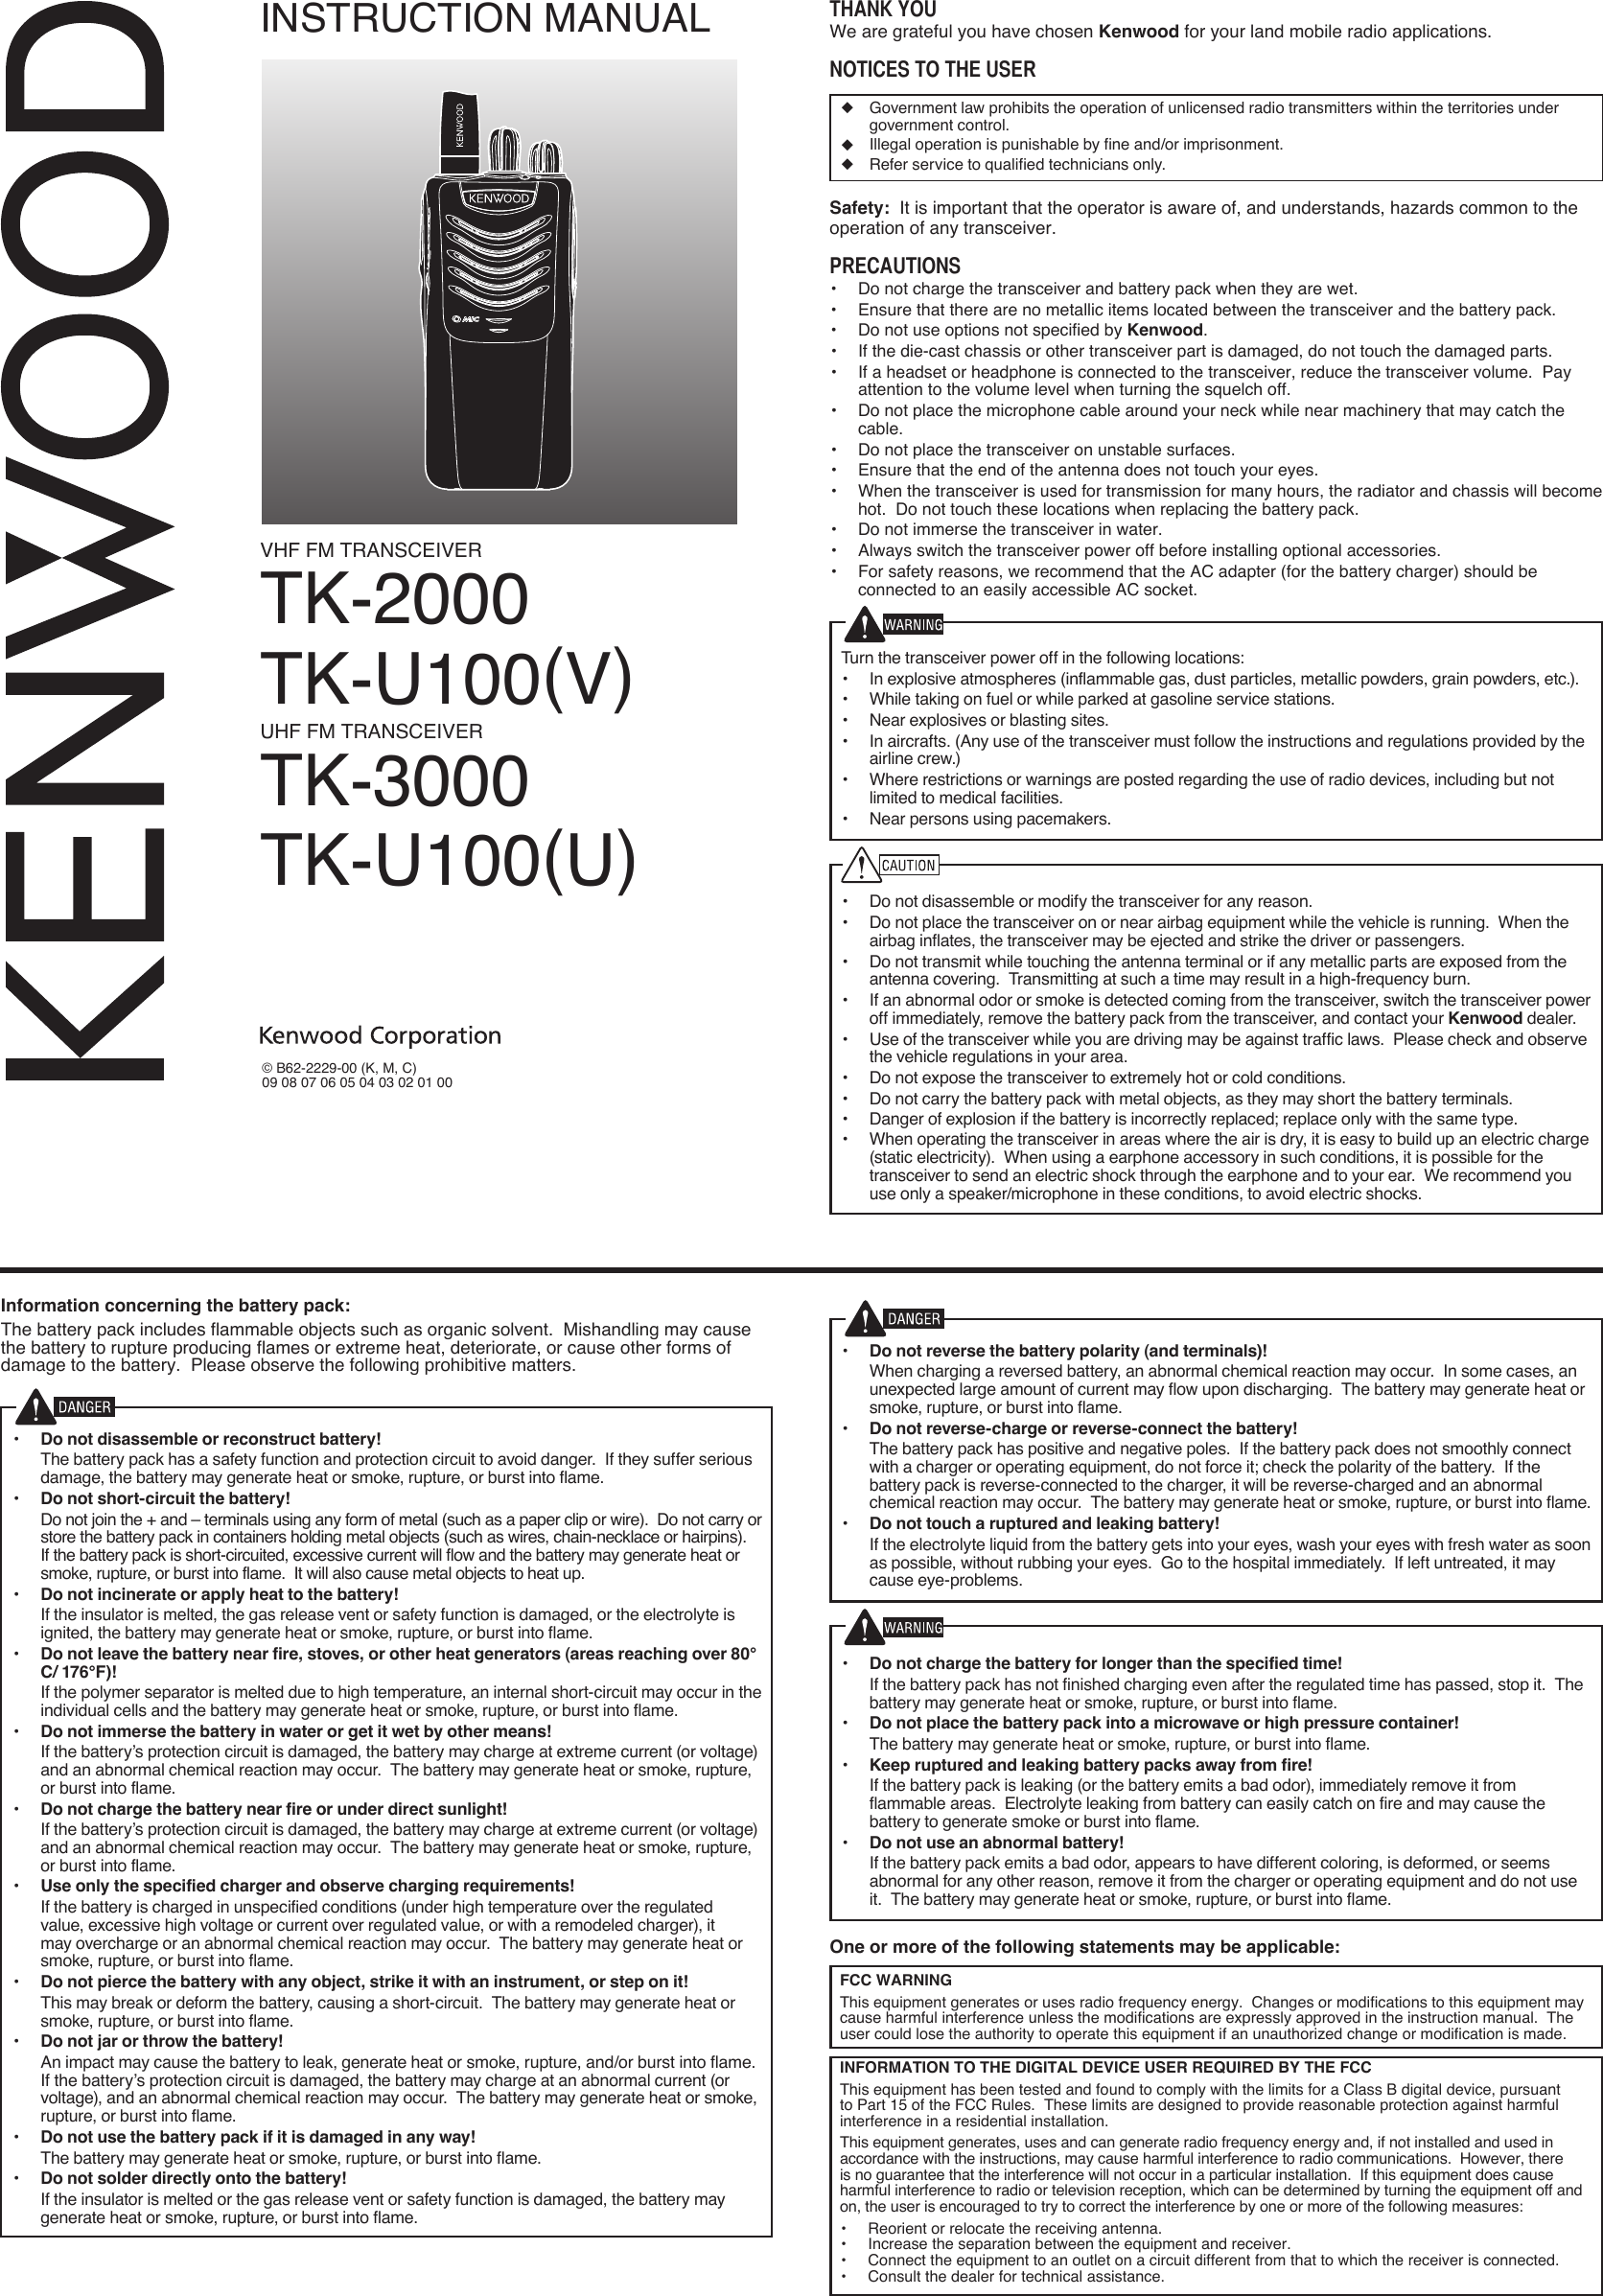 VHF FM TRANSCEIVERTK-2000TK-U100(V)UHF FM TRANSCEIVERTK-3000TK-U100(U)INSTRUCTION MANUAL© B62-2229-00 (K, M, C)09 08 07 06 05 04 03 02 01 00Thank YouWe are grateful you have chosen Kenwood for your land mobile radio applications. noTices To The user◆  Government law prohibits the operation of unlicensed radio transmitters within the territories under government control.◆  Illegal operation is punishable by fine and/or imprisonment.◆  Refer service to qualified technicians only.Safety:  It is important that the operator is aware of, and understands, hazards common to the operation of any transceiver.PrecauTions•  Do not charge the transceiver and battery pack when they are wet.•  Ensure that there are no metallic items located between the transceiver and the battery pack.•  Do not use options not specified by Kenwood.•  If the die-cast chassis or other transceiver part is damaged, do not touch the damaged parts.•  If a headset or headphone is connected to the transceiver, reduce the transceiver volume.  Pay attention to the volume level when turning the squelch off.•  Do not place the microphone cable around your neck while near machinery that may catch the cable.•  Do not place the transceiver on unstable surfaces.•  Ensure that the end of the antenna does not touch your eyes.•  When the transceiver is used for transmission for many hours, the radiator and chassis will become hot.  Do not touch these locations when replacing the battery pack.•  Do not immerse the transceiver in water.•  Always switch the transceiver power off before installing optional accessories.•  For safety reasons, we recommend that the AC adapter (for the battery charger) should be connected to an easily accessible AC socket.Turn the transceiver power off in the following locations:•  In explosive atmospheres (inflammable gas, dust particles, metallic powders, grain powders, etc.).•  While taking on fuel or while parked at gasoline service stations.•  Near explosives or blasting sites.•  In aircrafts. (Any use of the transceiver must follow the instructions and regulations provided by the airline crew.)•  Where restrictions or warnings are posted regarding the use of radio devices, including but not limited to medical facilities.•  Near persons using pacemakers.•  Do not disassemble or modify the transceiver for any reason.•  Do not place the transceiver on or near airbag equipment while the vehicle is running.  When the airbag inflates, the transceiver may be ejected and strike the driver or passengers.•  Do not transmit while touching the antenna terminal or if any metallic parts are exposed from the antenna covering.  Transmitting at such a time may result in a high-frequency burn.•  If an abnormal odor or smoke is detected coming from the transceiver, switch the transceiver power off immediately, remove the battery pack from the transceiver, and contact your Kenwood dealer.•  Use of the transceiver while you are driving may be against traffic laws.  Please check and observe the vehicle regulations in your area.•  Do not expose the transceiver to extremely hot or cold conditions.•  Do not carry the battery pack with metal objects, as they may short the battery terminals.•  Danger of explosion if the battery is incorrectly replaced; replace only with the same type. •  When operating the transceiver in areas where the air is dry, it is easy to build up an electric charge (static electricity).  When using a earphone accessory in such conditions, it is possible for the transceiver to send an electric shock through the earphone and to your ear.  We recommend you use only a speaker/microphone in these conditions, to avoid electric shocks.Information concerning the battery pack:The battery pack includes flammable objects such as organic solvent.  Mishandling may cause the battery to rupture producing flames or extreme heat, deteriorate, or cause other forms of damage to the battery.  Please observe the following prohibitive matters.•  Do not disassemble or reconstruct battery!  The battery pack has a safety function and protection circuit to avoid danger.  If they suffer serious damage, the battery may generate heat or smoke, rupture, or burst into flame.•  Do not short-circuit the battery!  Do not join the + and – terminals using any form of metal (such as a paper clip or wire).  Do not carry or store the battery pack in containers holding metal objects (such as wires, chain-necklace or hairpins).  If the battery pack is short-circuited, excessive current will flow and the battery may generate heat or smoke, rupture, or burst into flame.  It will also cause metal objects to heat up.•  Do not incinerate or apply heat to the battery!  If the insulator is melted, the gas release vent or safety function is damaged, or the electrolyte is ignited, the battery may generate heat or smoke, rupture, or burst into flame.•  Do not leave the battery near fire, stoves, or other heat generators (areas reaching over 80°C/ 176°F)!  If the polymer separator is melted due to high temperature, an internal short-circuit may occur in the individual cells and the battery may generate heat or smoke, rupture, or burst into flame.  •  Do not immerse the battery in water or get it wet by other means!  If the battery’s protection circuit is damaged, the battery may charge at extreme current (or voltage) and an abnormal chemical reaction may occur.  The battery may generate heat or smoke, rupture, or burst into flame.•  Do not charge the battery near fire or under direct sunlight!  If the battery’s protection circuit is damaged, the battery may charge at extreme current (or voltage) and an abnormal chemical reaction may occur.  The battery may generate heat or smoke, rupture, or burst into flame.•  Use only the specified charger and observe charging requirements!  If the battery is charged in unspecified conditions (under high temperature over the regulated value, excessive high voltage or current over regulated value, or with a remodeled charger), it may overcharge or an abnormal chemical reaction may occur.  The battery may generate heat or smoke, rupture, or burst into flame.•  Do not pierce the battery with any object, strike it with an instrument, or step on it!  This may break or deform the battery, causing a short-circuit.  The battery may generate heat or smoke, rupture, or burst into flame.•  Do not jar or throw the battery!  An impact may cause the battery to leak, generate heat or smoke, rupture, and/or burst into flame.  If the battery’s protection circuit is damaged, the battery may charge at an abnormal current (or voltage), and an abnormal chemical reaction may occur.  The battery may generate heat or smoke, rupture, or burst into flame.•  Do not use the battery pack if it is damaged in any way!  The battery may generate heat or smoke, rupture, or burst into flame.•  Do not solder directly onto the battery!  If the insulator is melted or the gas release vent or safety function is damaged, the battery may generate heat or smoke, rupture, or burst into flame.•  Do not reverse the battery polarity (and terminals)!  When charging a reversed battery, an abnormal chemical reaction may occur.  In some cases, an unexpected large amount of current may flow upon discharging.  The battery may generate heat or smoke, rupture, or burst into flame.•  Do not reverse-charge or reverse-connect the battery!  The battery pack has positive and negative poles.  If the battery pack does not smoothly connect with a charger or operating equipment, do not force it; check the polarity of the battery.  If the battery pack is reverse-connected to the charger, it will be reverse-charged and an abnormal chemical reaction may occur.  The battery may generate heat or smoke, rupture, or burst into flame.•  Do not touch a ruptured and leaking battery!  If the electrolyte liquid from the battery gets into your eyes, wash your eyes with fresh water as soon as possible, without rubbing your eyes.  Go to the hospital immediately.  If left untreated, it may cause eye-problems.•  Do not charge the battery for longer than the specified time!  If the battery pack has not finished charging even after the regulated time has passed, stop it.  The battery may generate heat or smoke, rupture, or burst into flame.•  Do not place the battery pack into a microwave or high pressure container!  The battery may generate heat or smoke, rupture, or burst into flame.•  Keep ruptured and leaking battery packs away from fire!  If the battery pack is leaking (or the battery emits a bad odor), immediately remove it from flammable areas.  Electrolyte leaking from battery can easily catch on fire and may cause the battery to generate smoke or burst into flame.•  Do not use an abnormal battery!  If the battery pack emits a bad odor, appears to have different coloring, is deformed, or seems abnormal for any other reason, remove it from the charger or operating equipment and do not use it.  The battery may generate heat or smoke, rupture, or burst into flame.One or more of the following statements may be applicable:FCC WARNING  This equipment generates or uses radio frequency energy.  Changes or modifications to this equipment may cause harmful interference unless the modifications are expressly approved in the instruction manual.  The user could lose the authority to operate this equipment if an unauthorized change or modification is made.INFORMATION TO THE DIGITAL DEVICE USER REQUIRED BY THE FCC  This equipment has been tested and found to comply with the limits for a Class B digital device, pursuant to Part 15 of the FCC Rules.  These limits are designed to provide reasonable protection against harmful interference in a residential installation.  This equipment generates, uses and can generate radio frequency energy and, if not installed and used in accordance with the instructions, may cause harmful interference to radio communications.  However, there is no guarantee that the interference will not occur in a particular installation.  If this equipment does cause harmful interference to radio or television reception, which can be determined by turning the equipment off and on, the user is encouraged to try to correct the interference by one or more of the following measures:•  Reorient or relocate the receiving antenna.•  Increase the separation between the equipment and receiver.•  Connect the equipment to an outlet on a circuit different from that to which the receiver is connected.•  Consult the dealer for technical assistance.